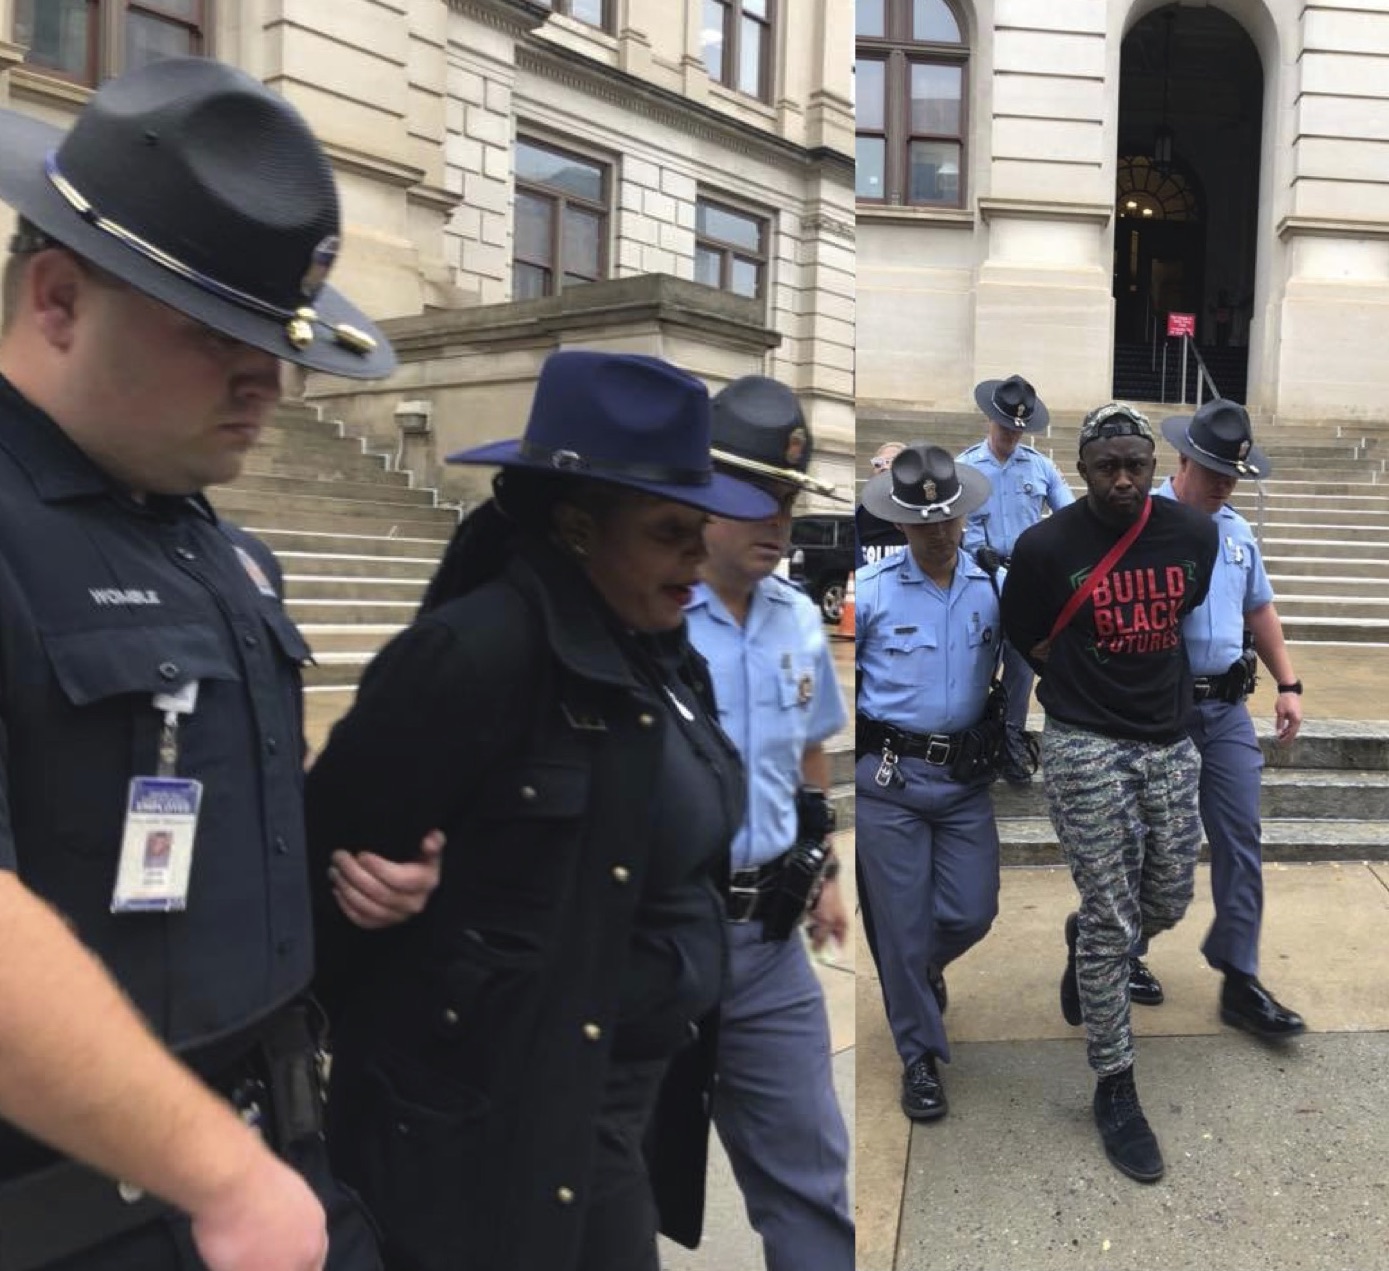 (Left panel) A Black woman in navy-blue hat and suit, wrists tied behind her back, walking between two policemen, one on each elbow. Right panel, a Black man in a black T-shirt and print pants being similarly escorted. Massive old stone steps behind them.